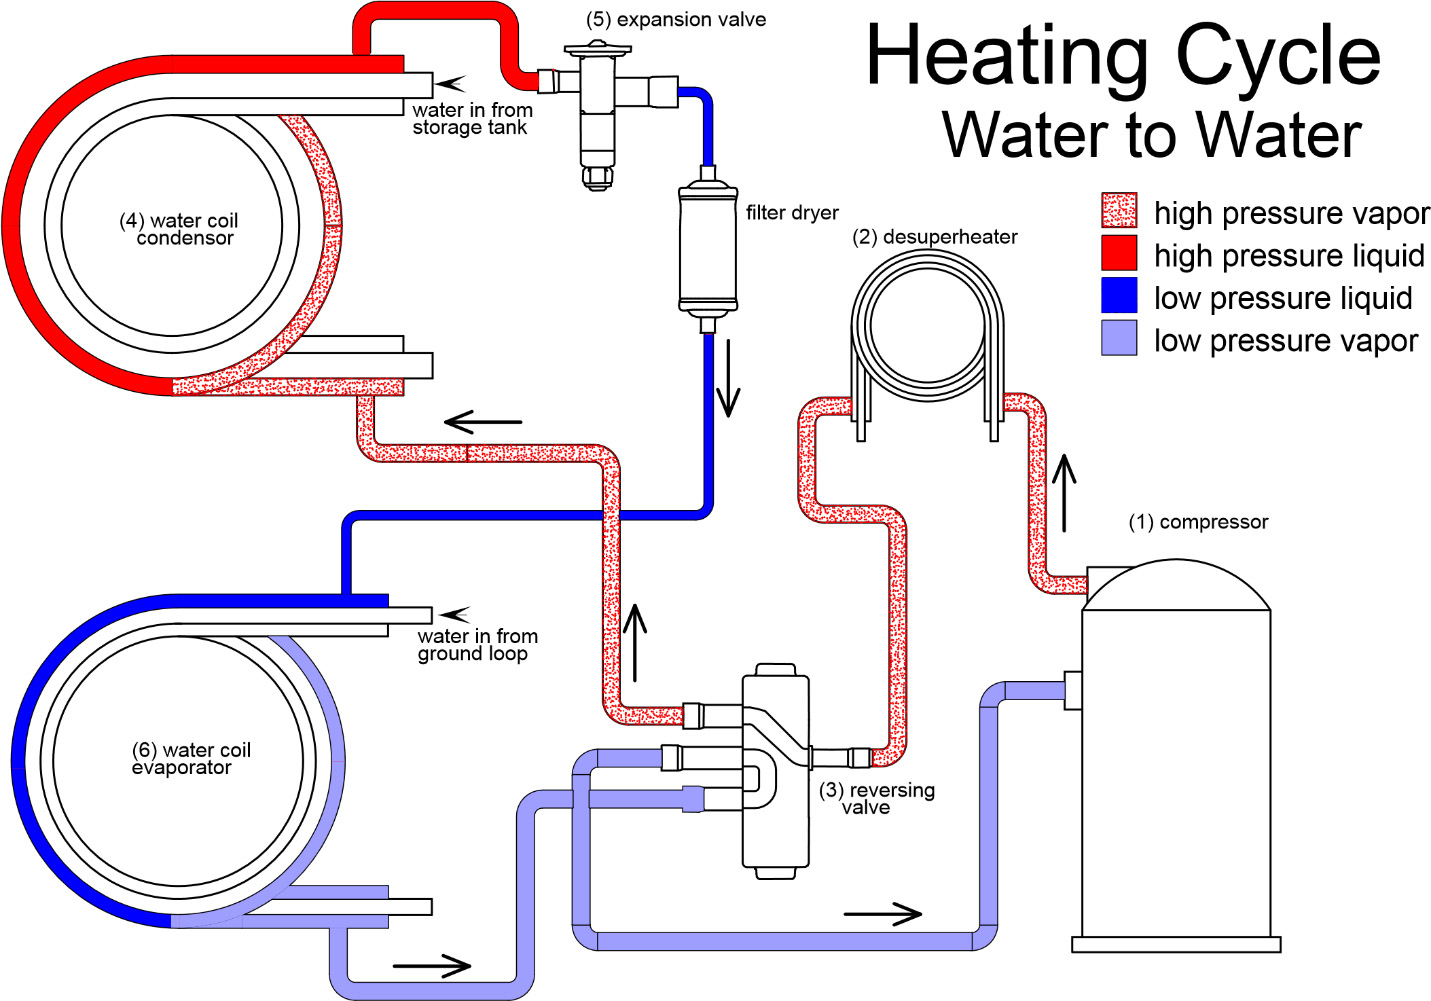 Heating Cycle - Water to Water